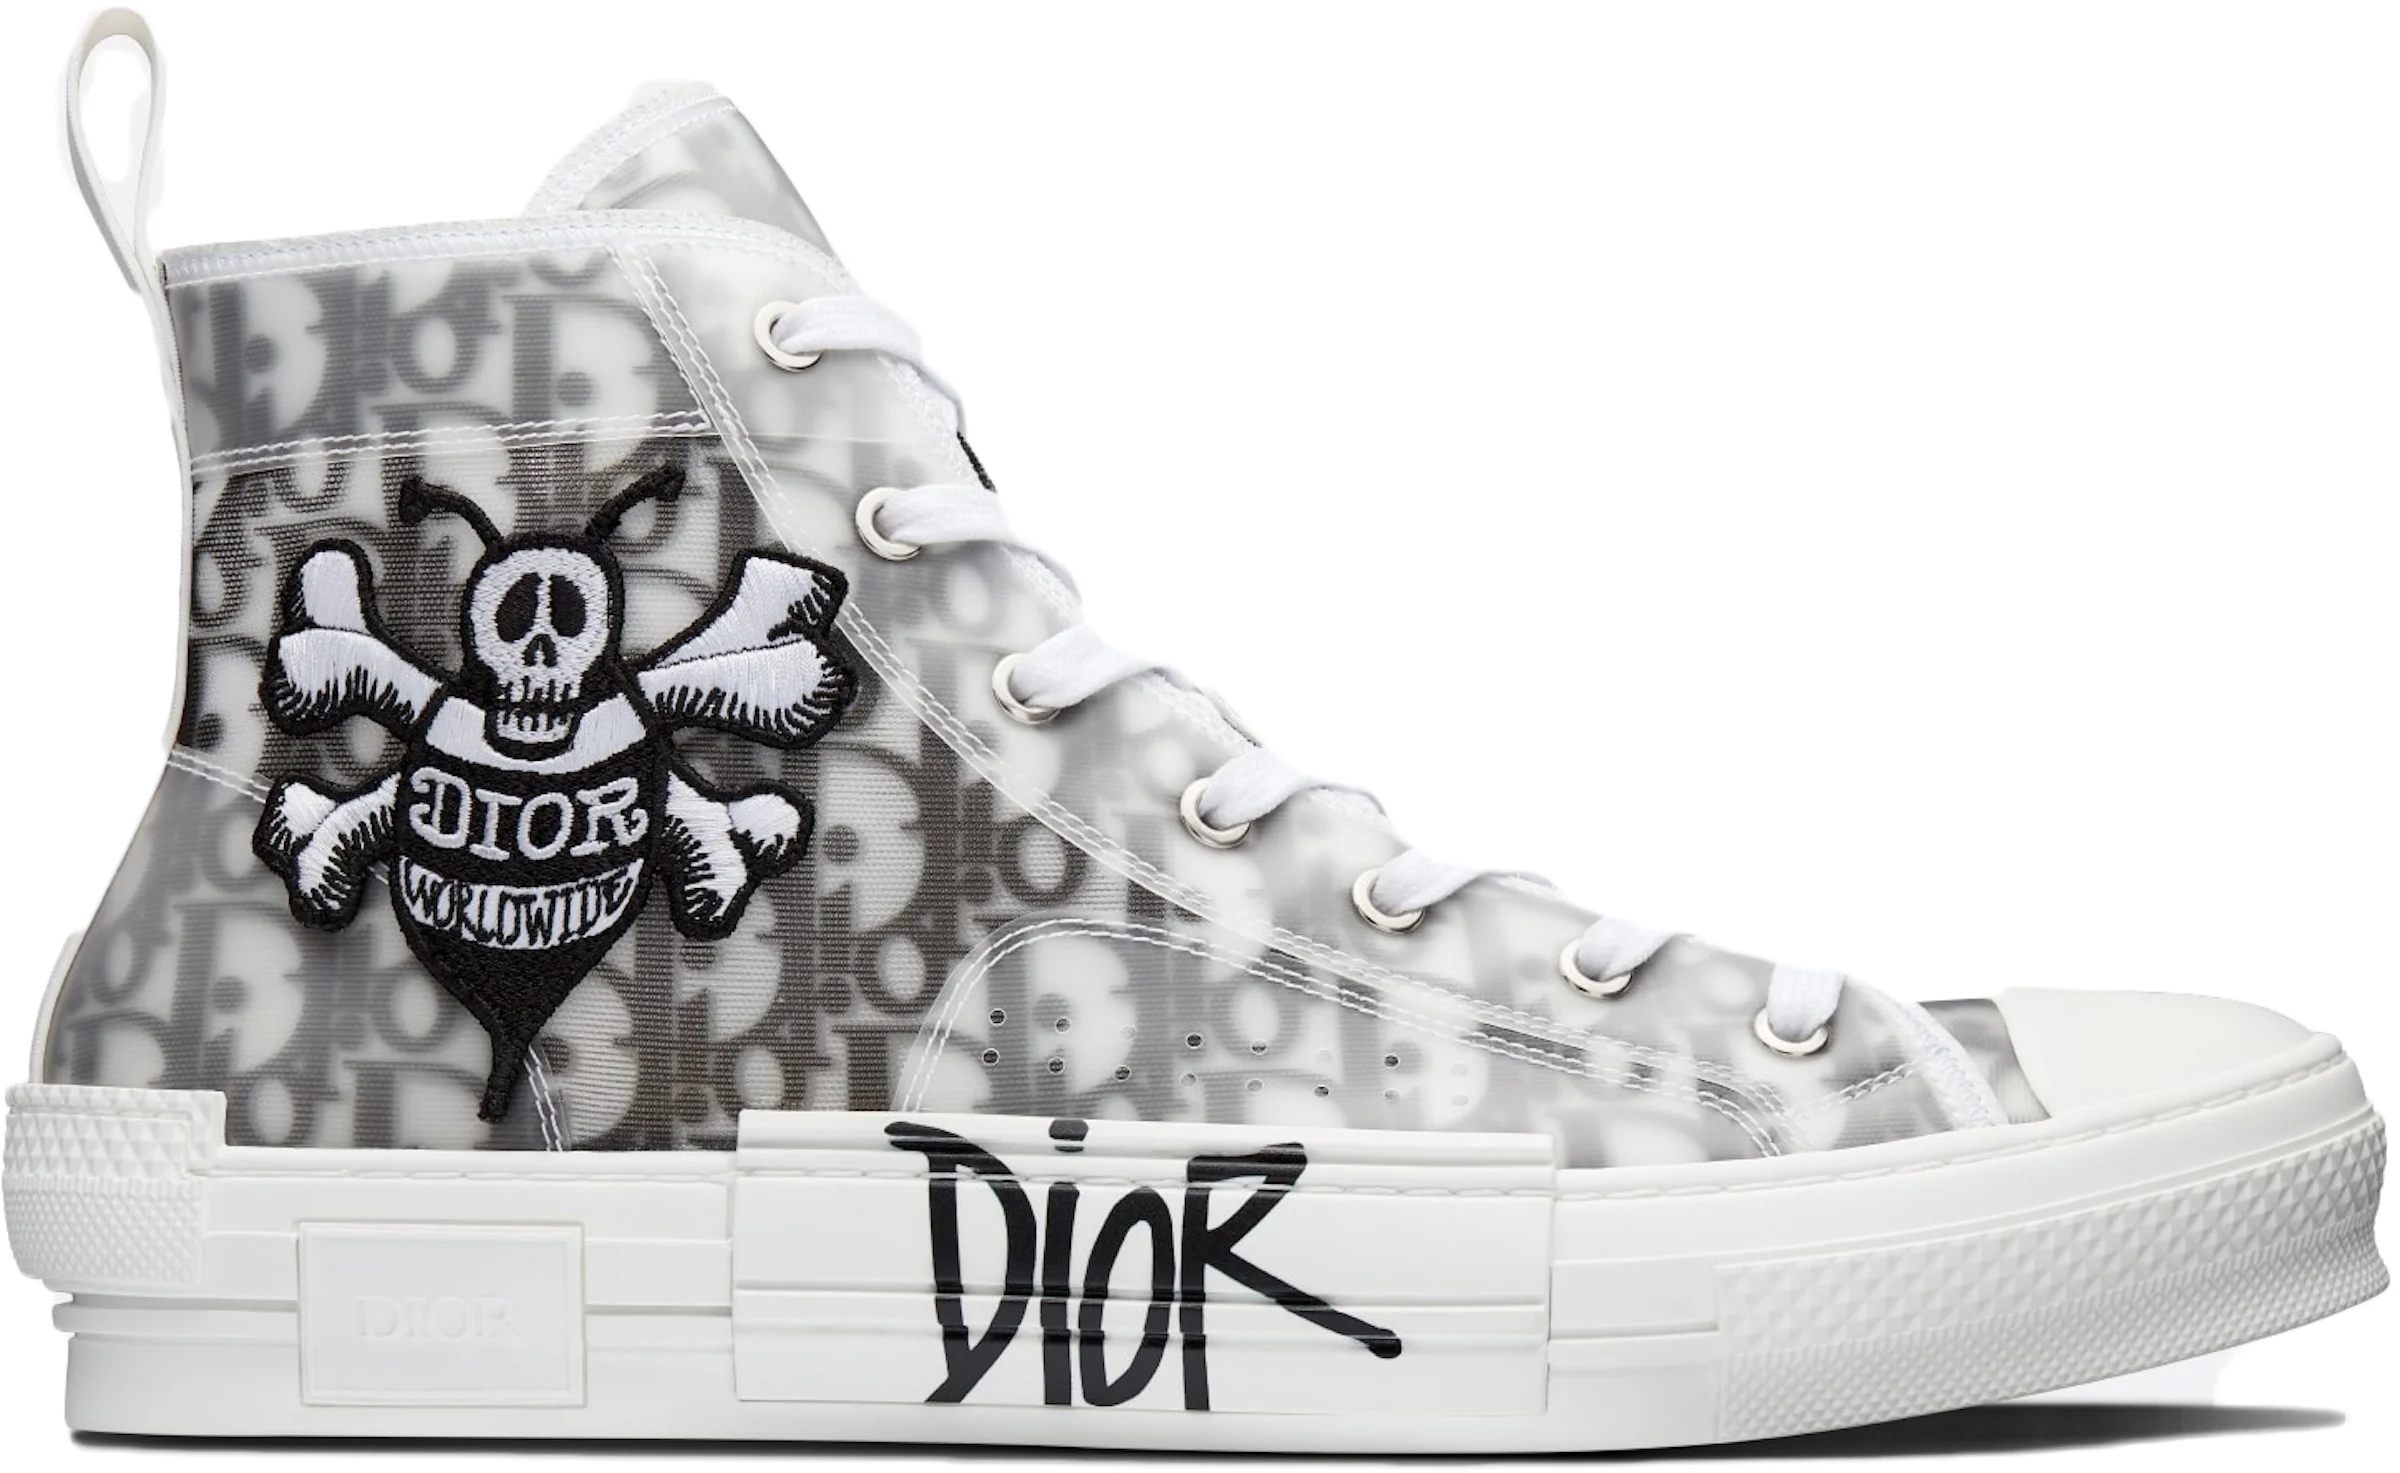 https://images.stockx.com/images/Dior-B23-High-Top-Dior-x-Shawn-Bee-Embroidery.jpg?fit=fill&bg=FFFFFF&w=1200&h=857&fm=webp&auto=compress&dpr=2&trim=color&updated_at=1613339401&q=60